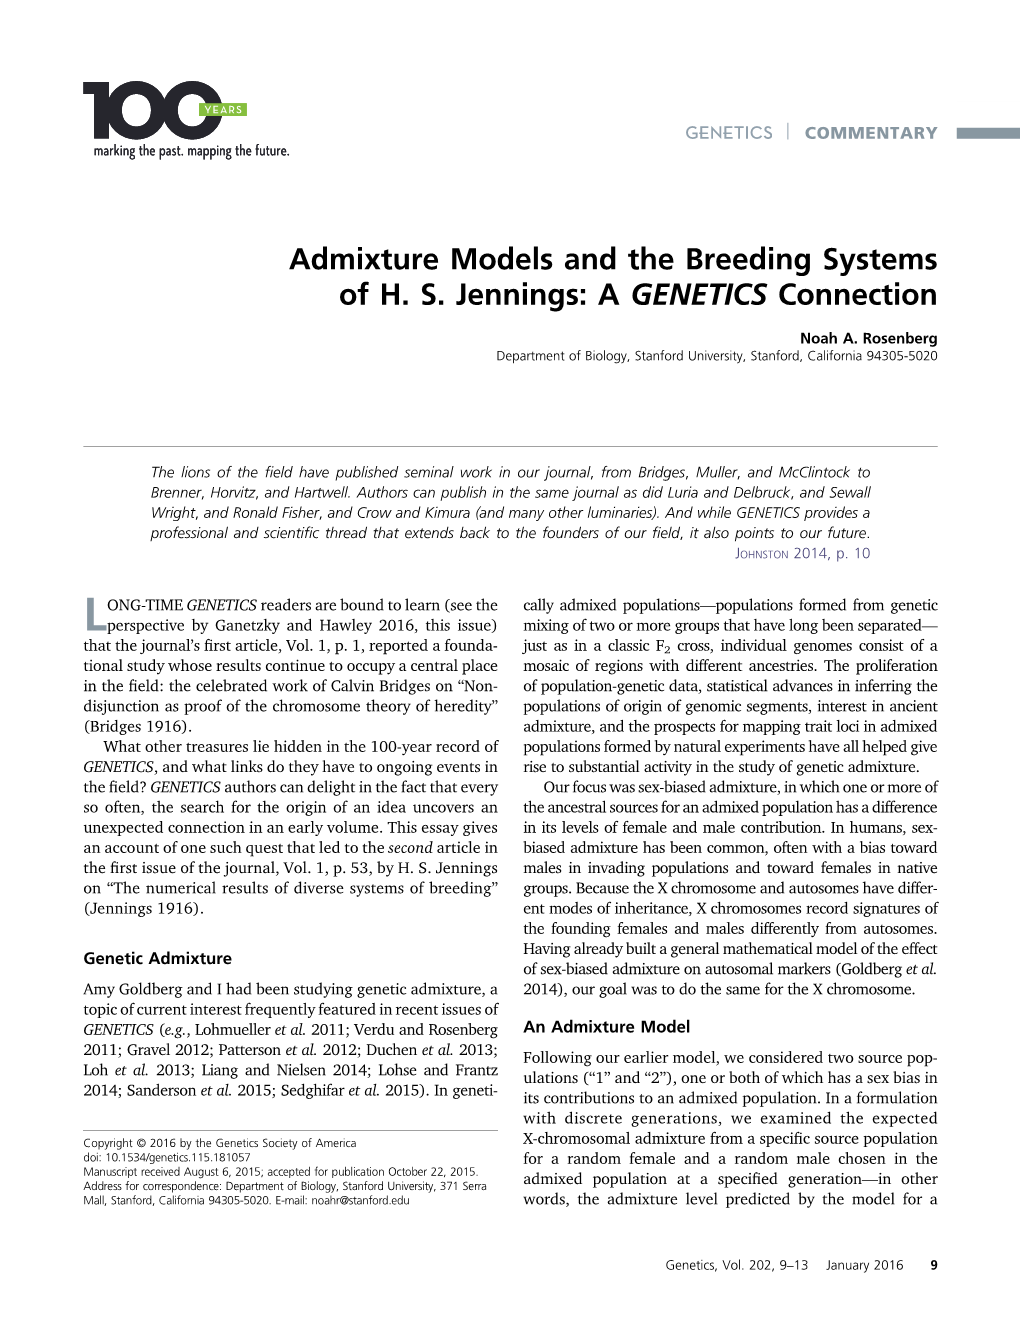 Admixture Models and the Breeding Systems of H. S. Jennings: a GENETICS Connection